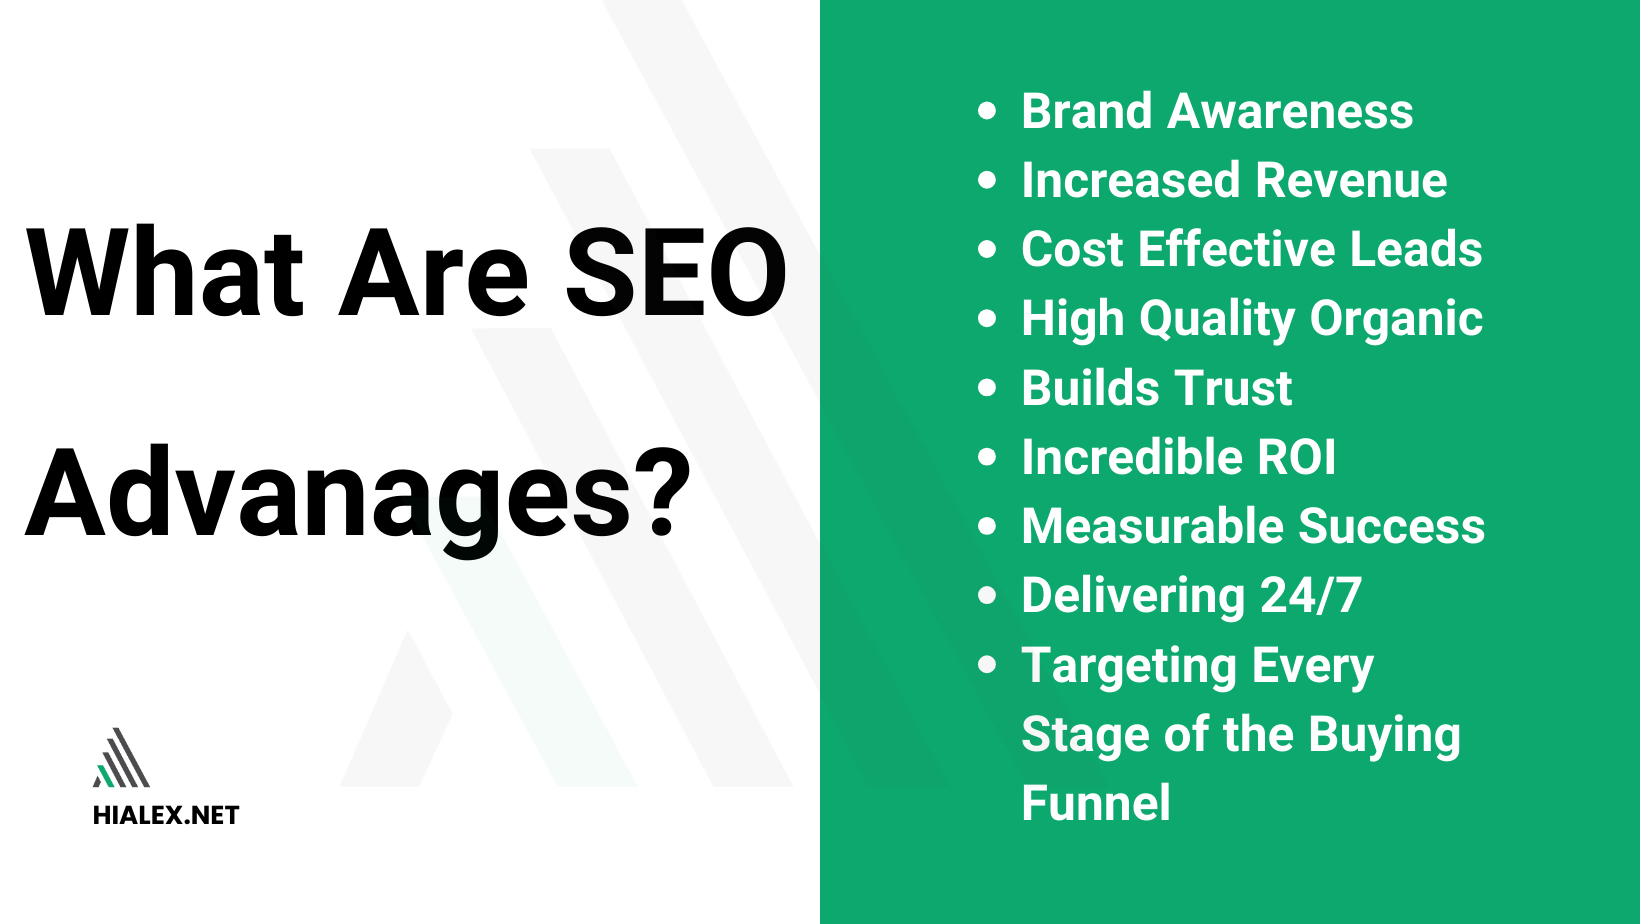 The benefits of SEO